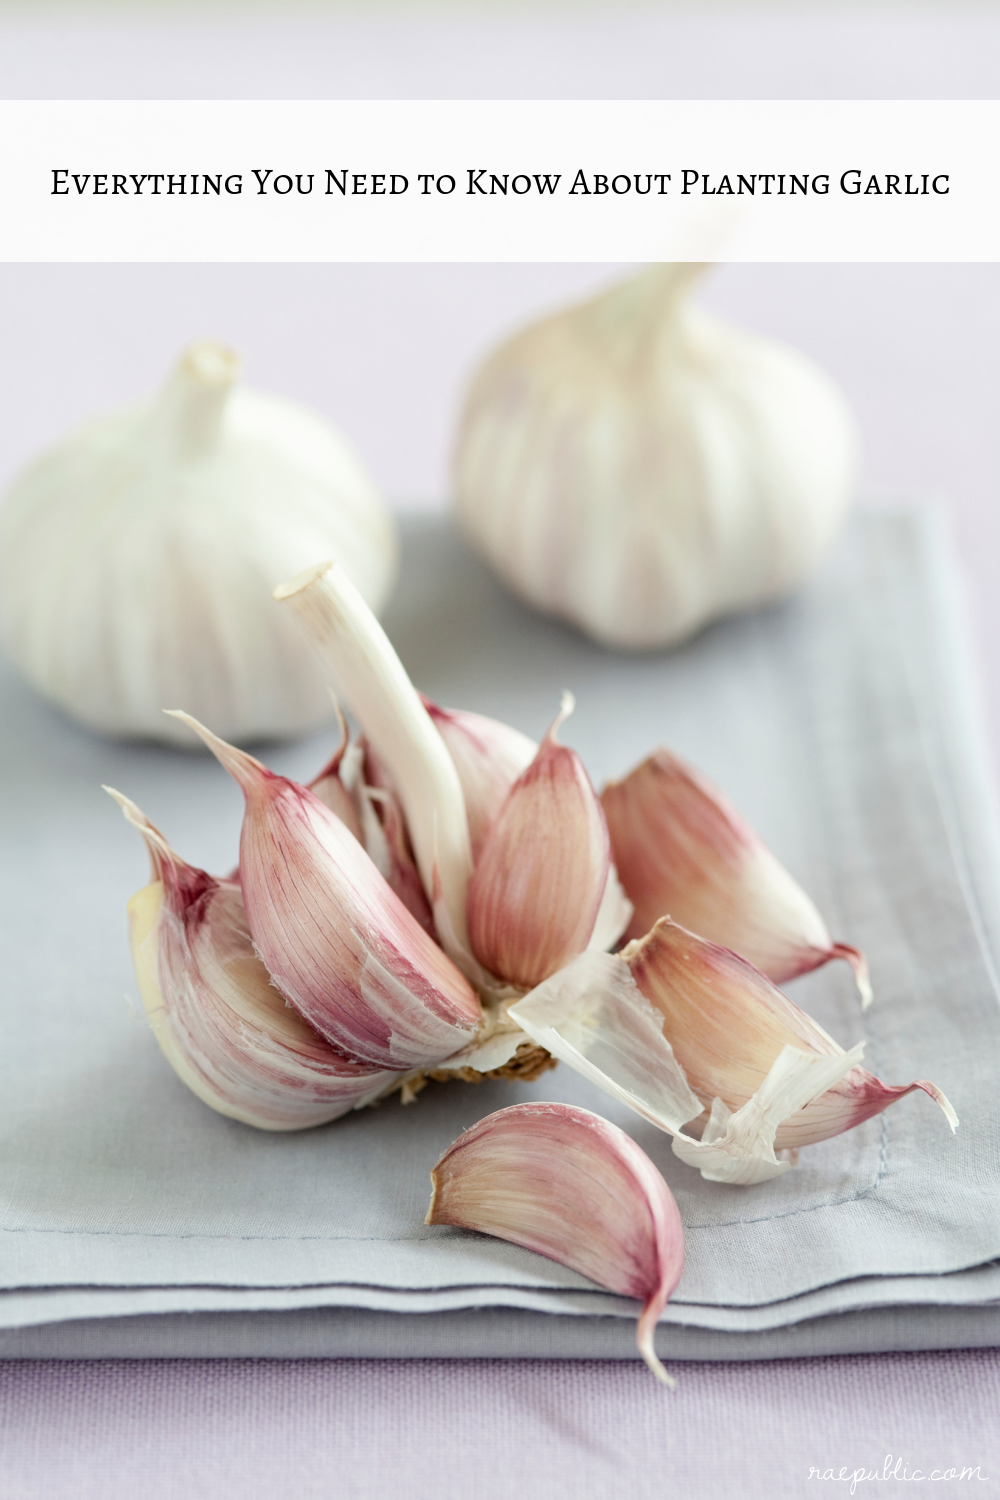 Everything you need to know about planting garlic.